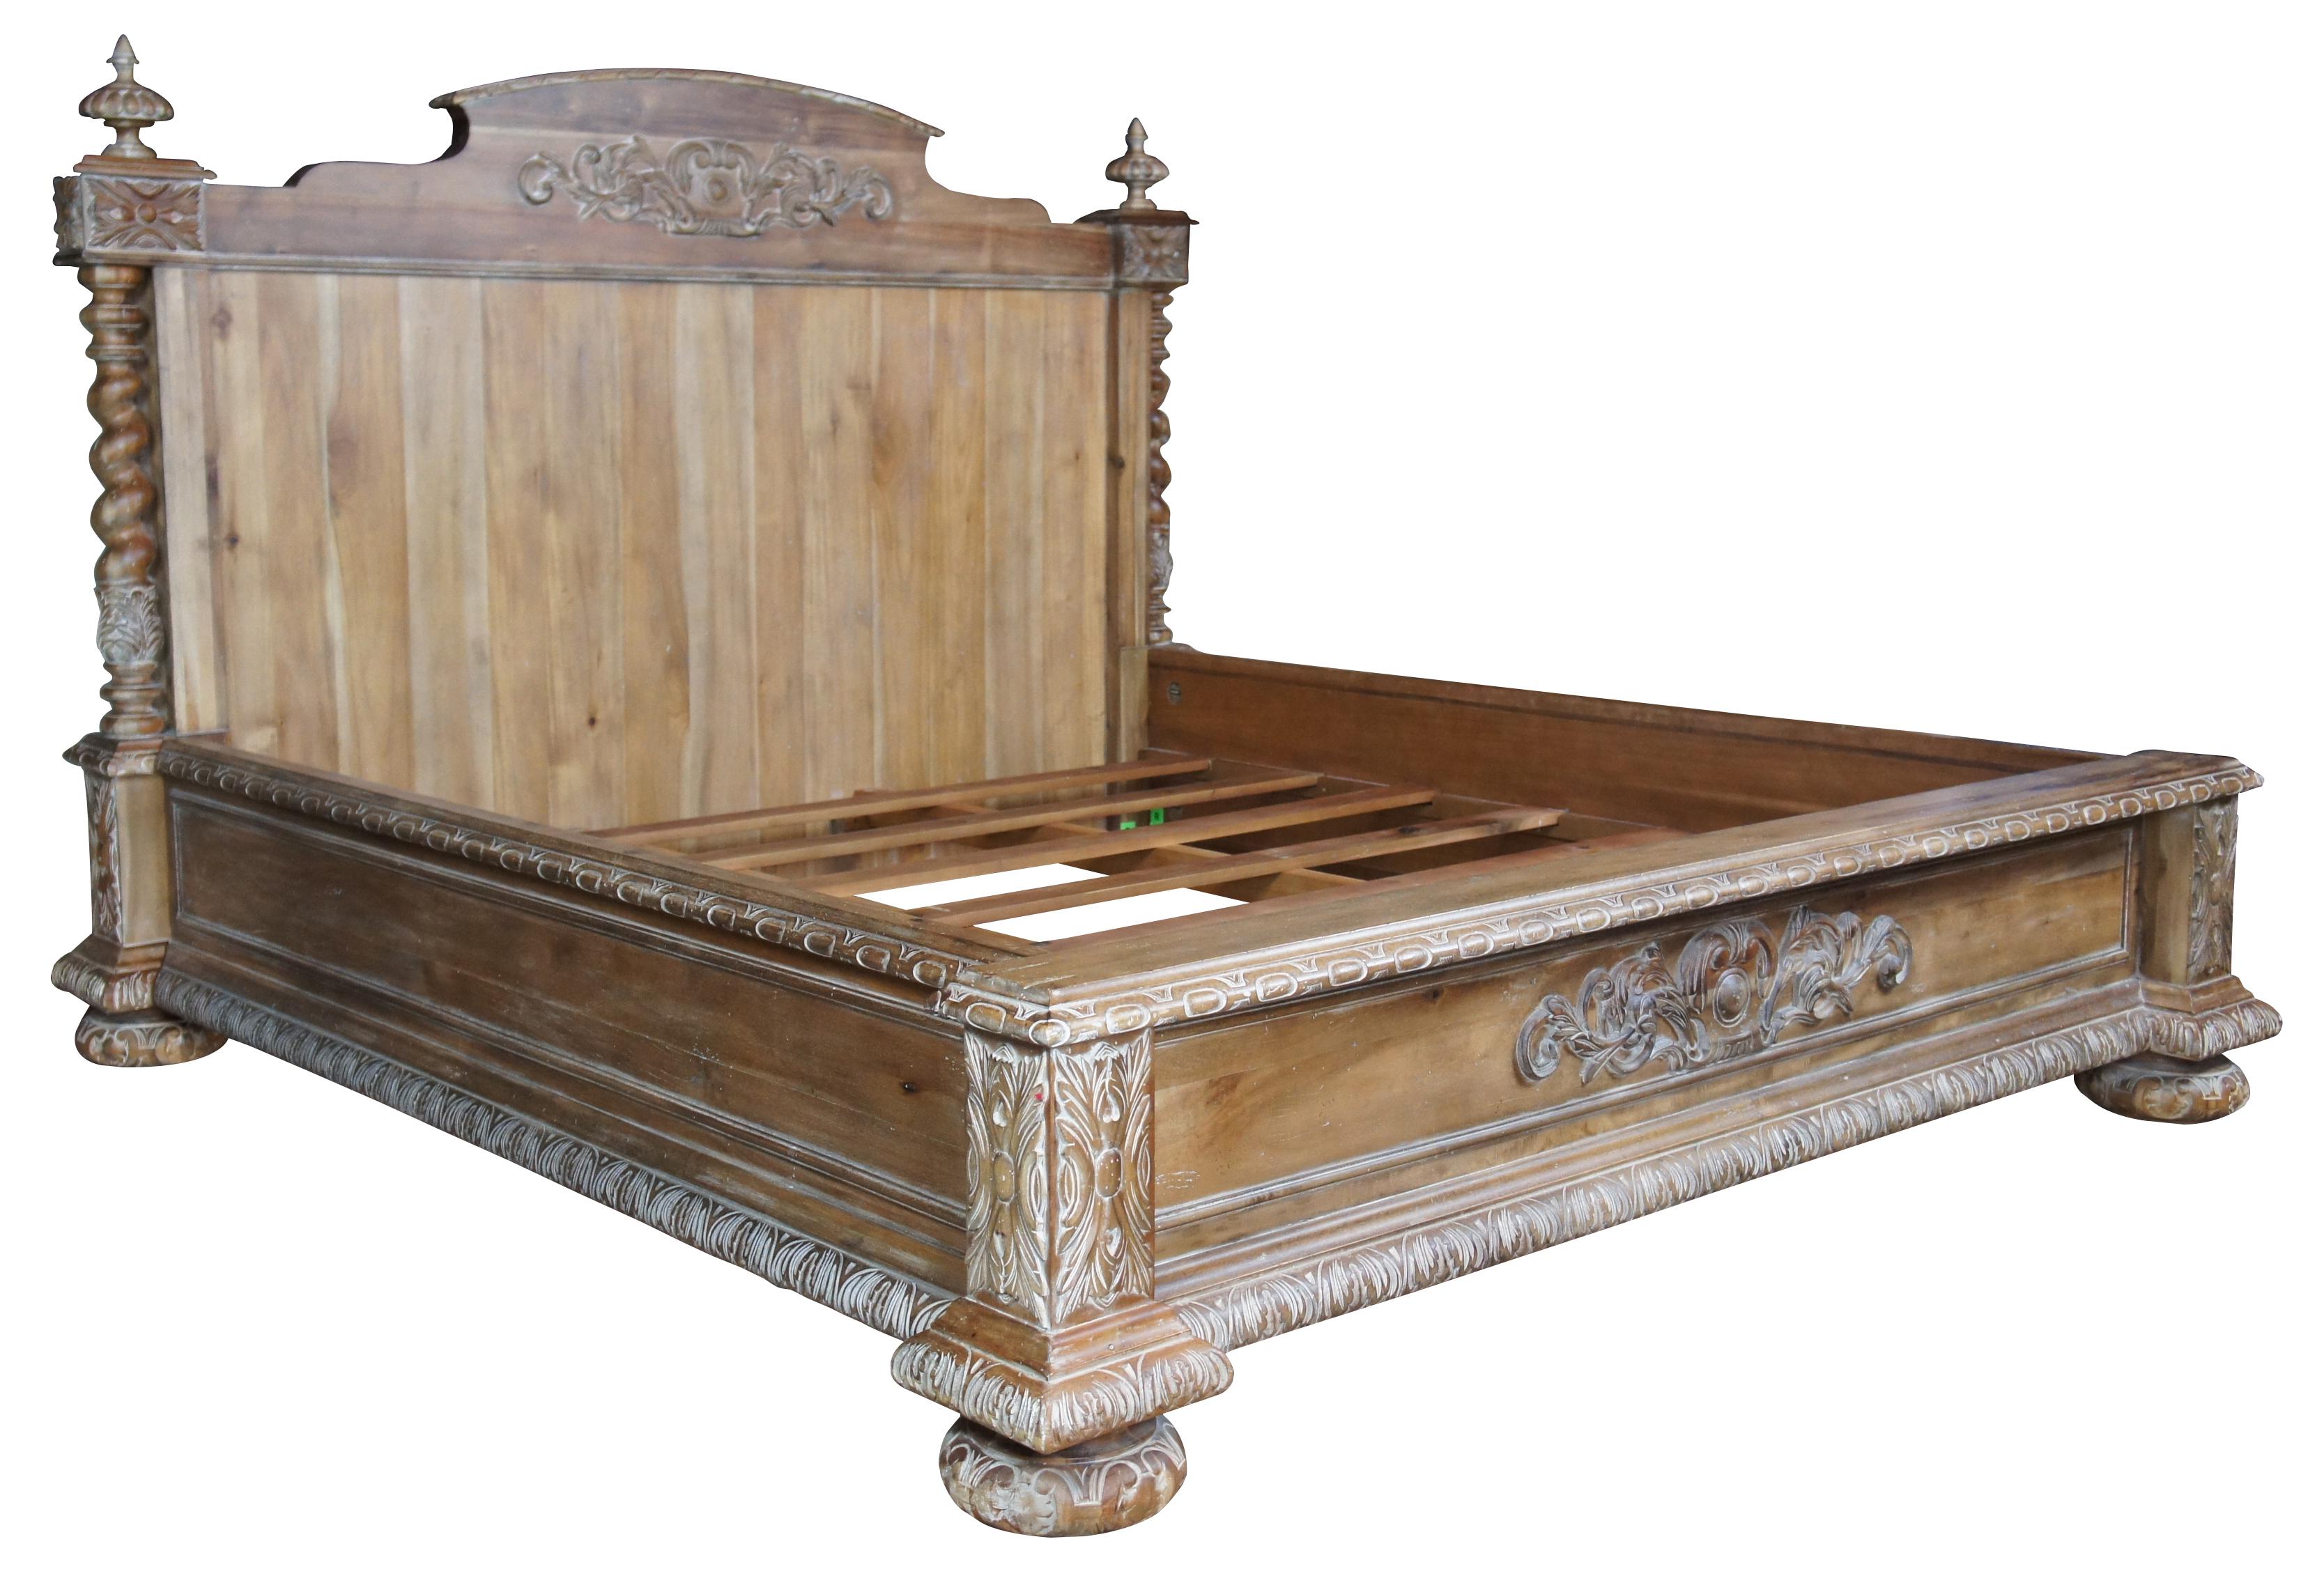 French style panel bed by Restoration Hardware. Features ornate hand carving and bun feet. From the second Empire-inspired bedroom collection – a mid-19th century French style characterized by the use of rich woods and decorative molding. Carefully